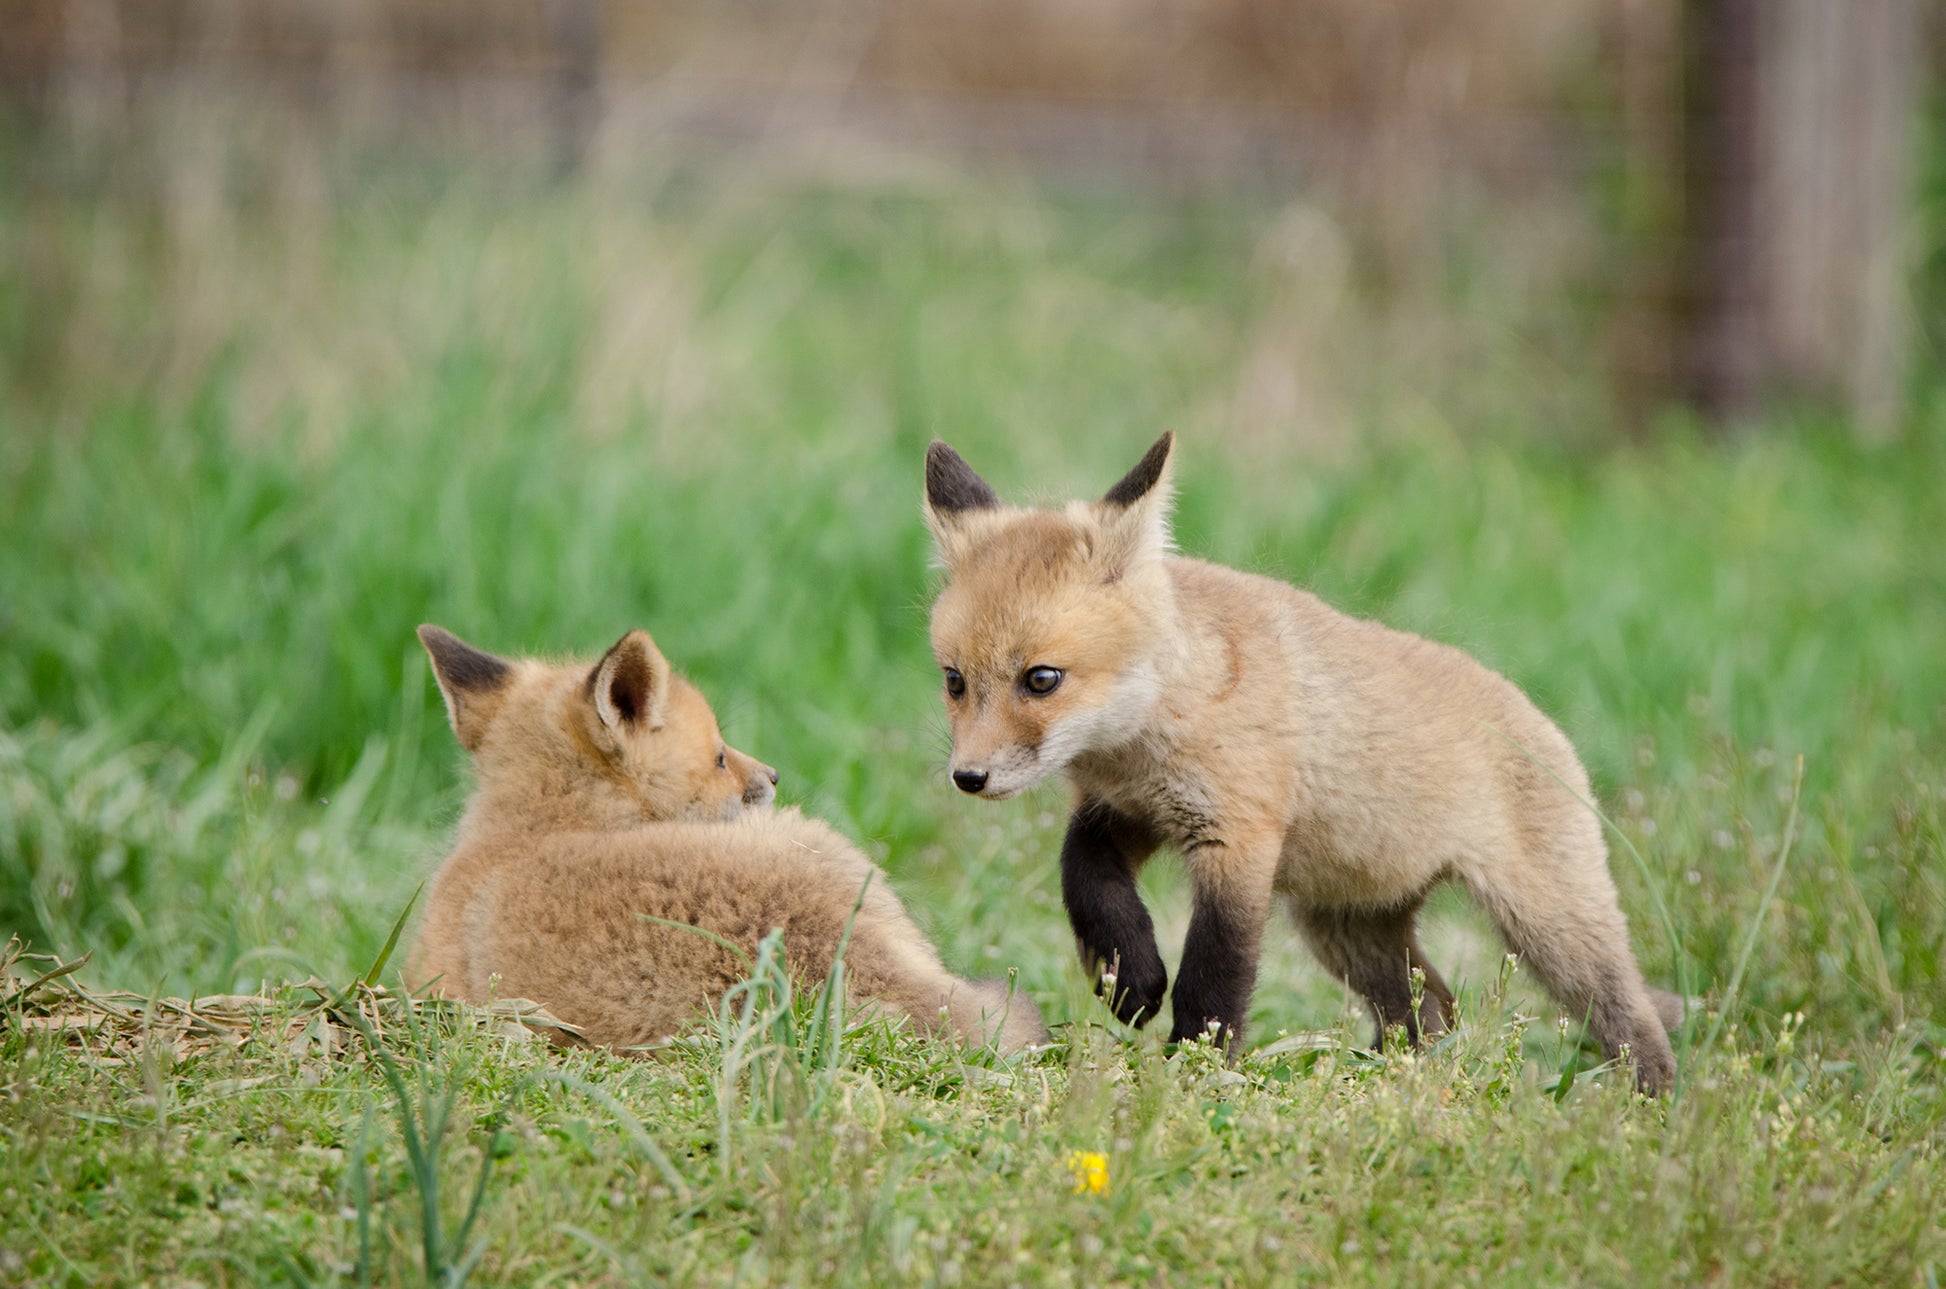 Large Bedroom Canvas Art: Fox Pups / Kits - Coming to Get You Animal / Wildlife Photograph Fine Art Canvas Wall Art Prints